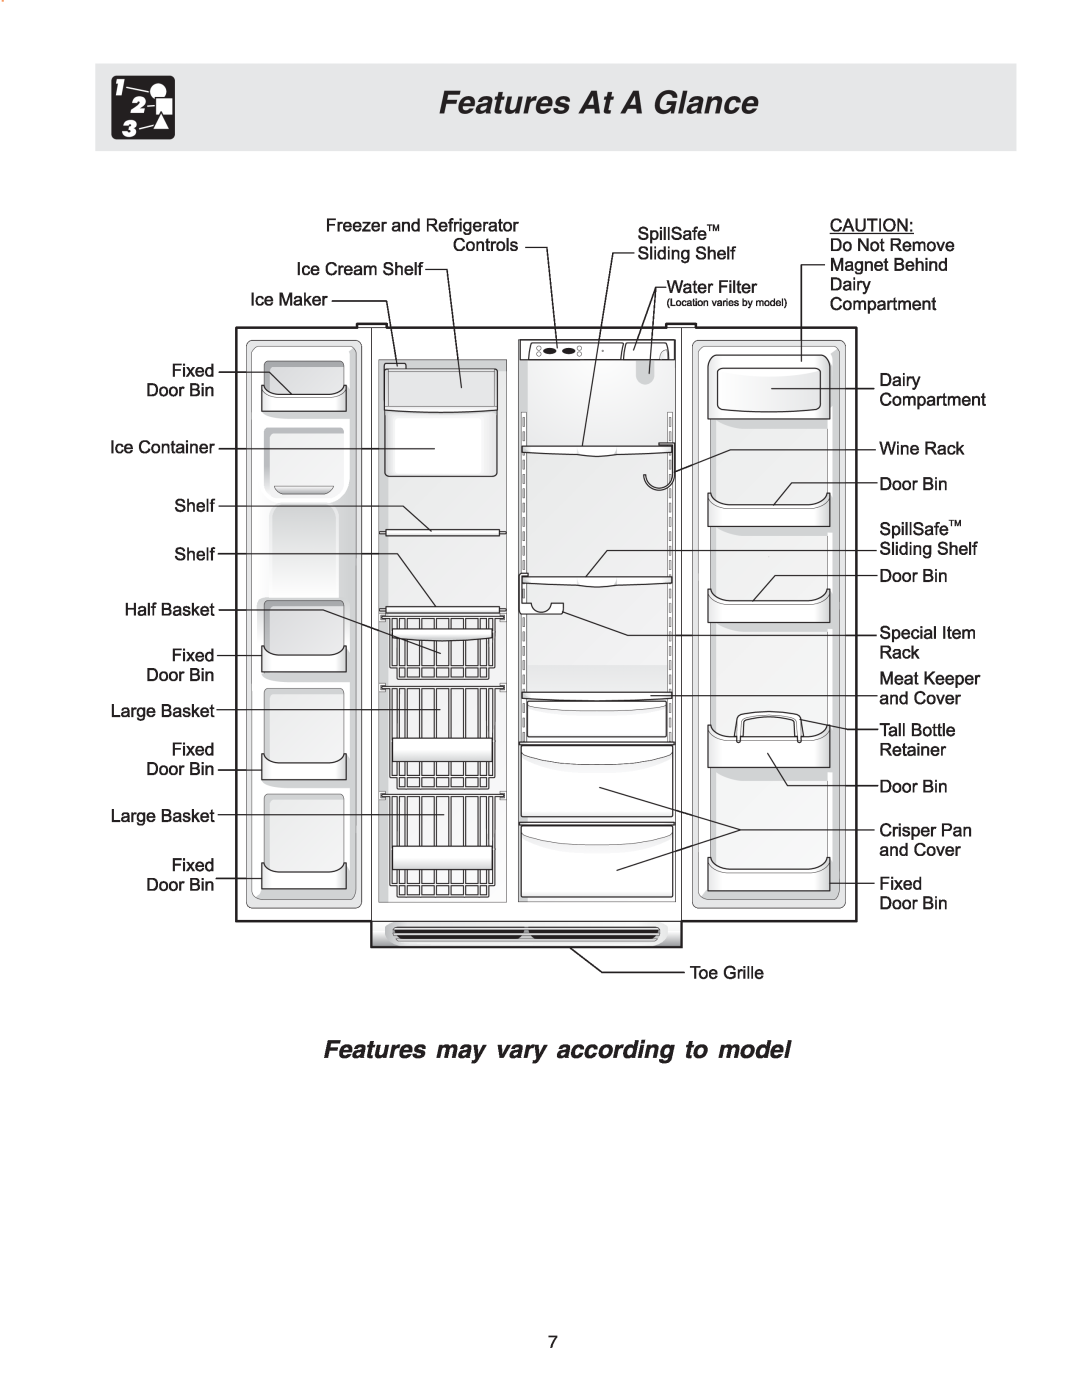 Frigidaire Compact Refrigerator manual Features At A Glance, Features may vary according to model 